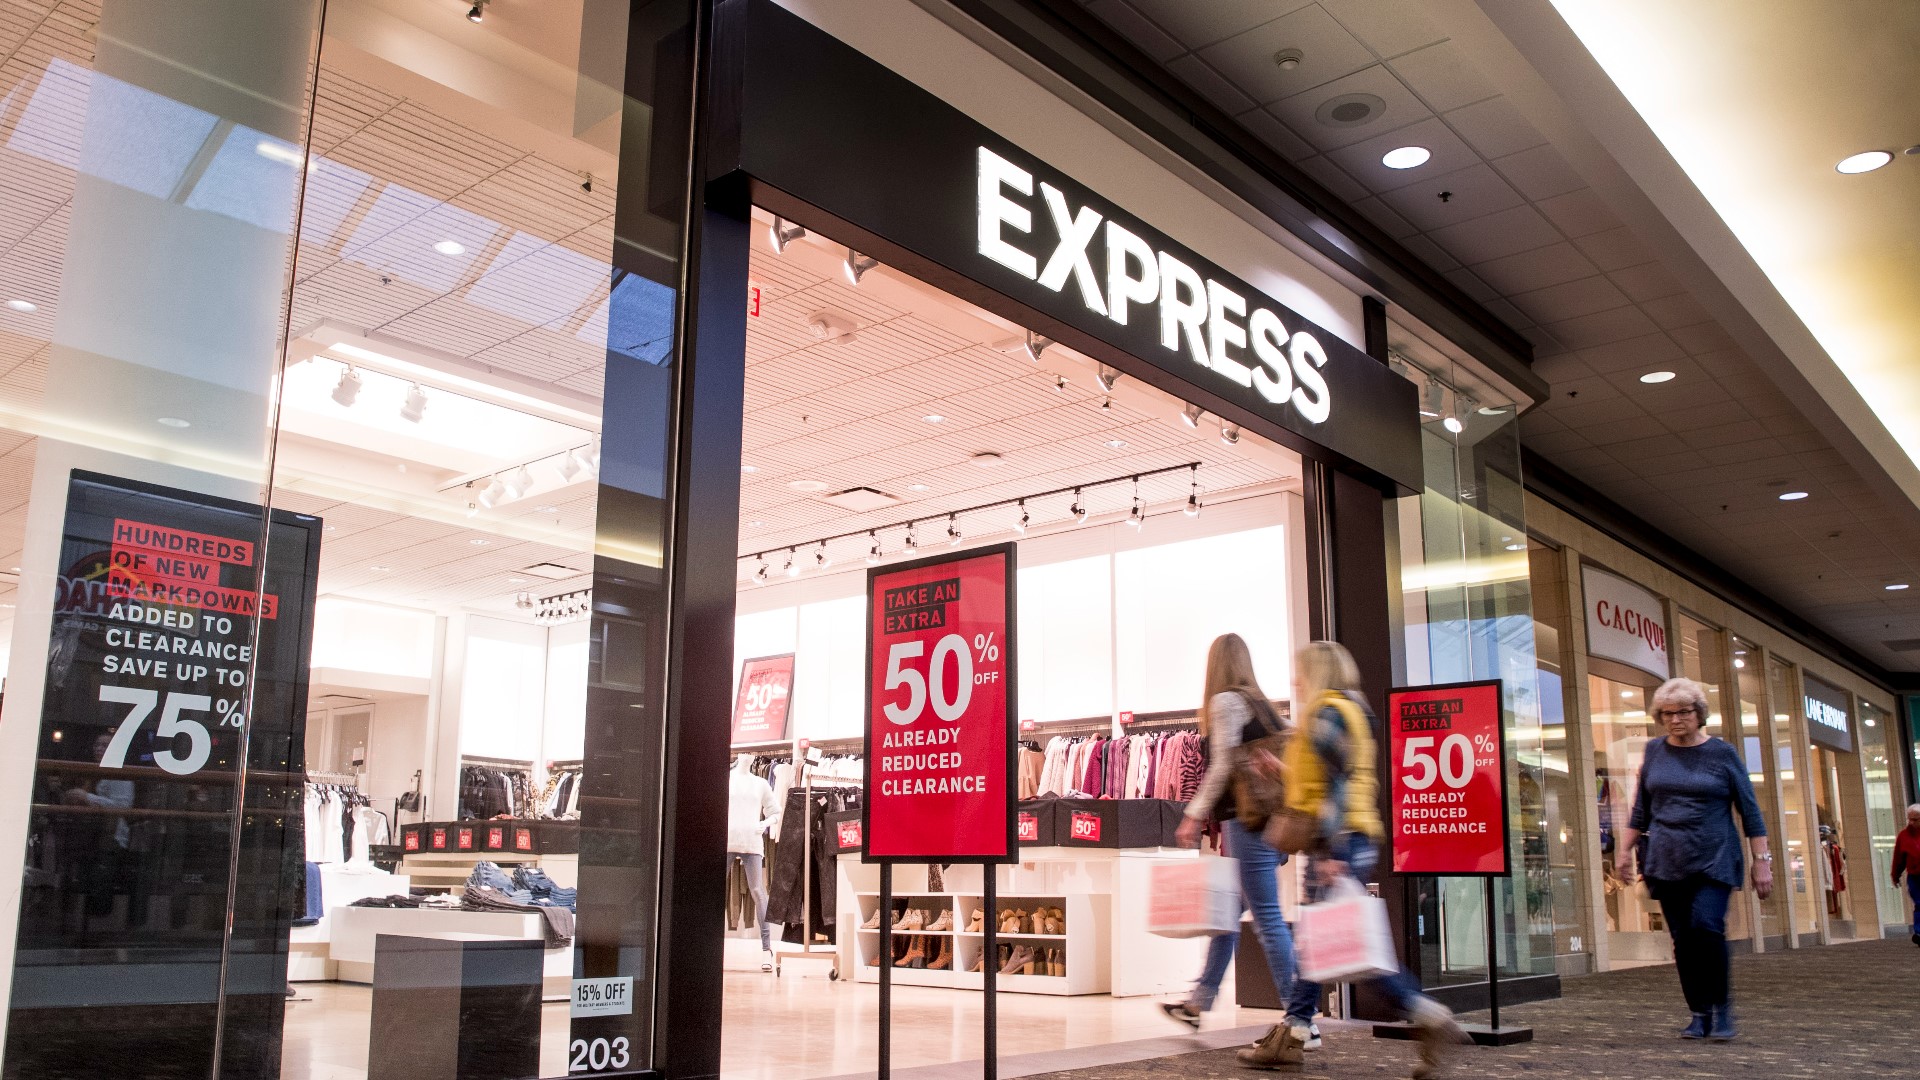 The fashion retailer Express has filed for bankruptcy and will close 95 of its more than 500 stores.